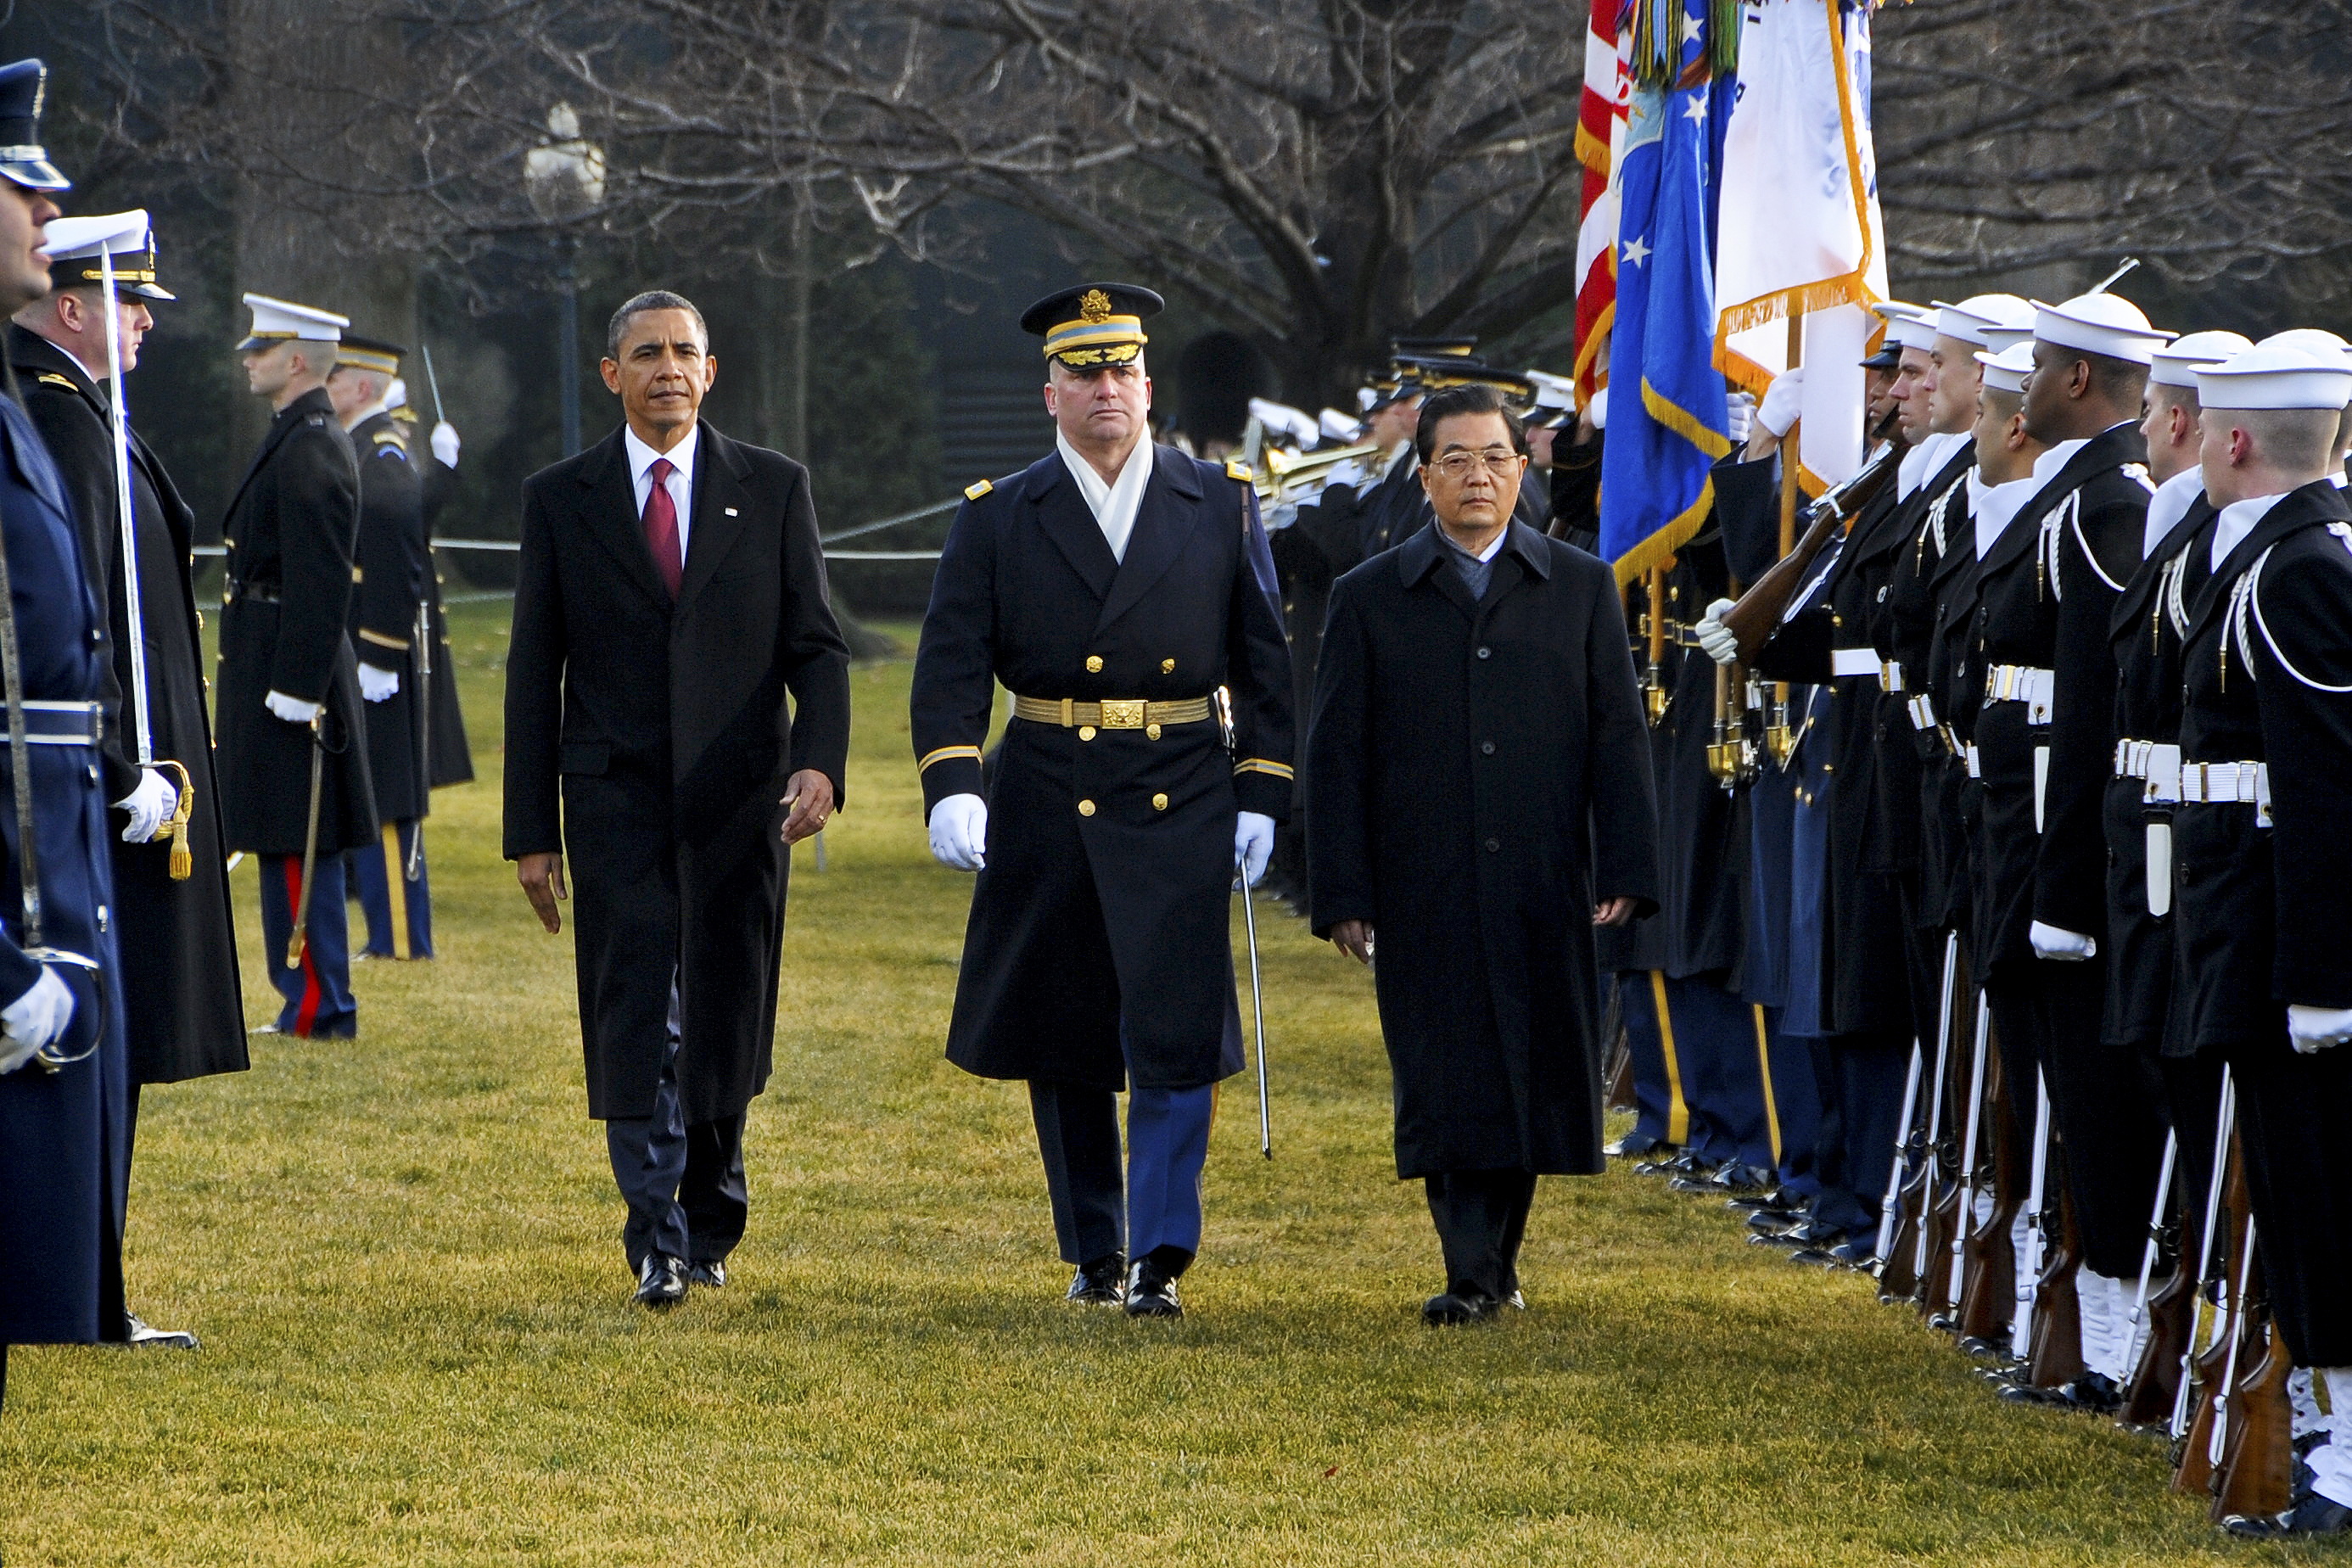 File:Flickr - The U.S. Army - Honor Guard review.jpg - Wikimedia Commons